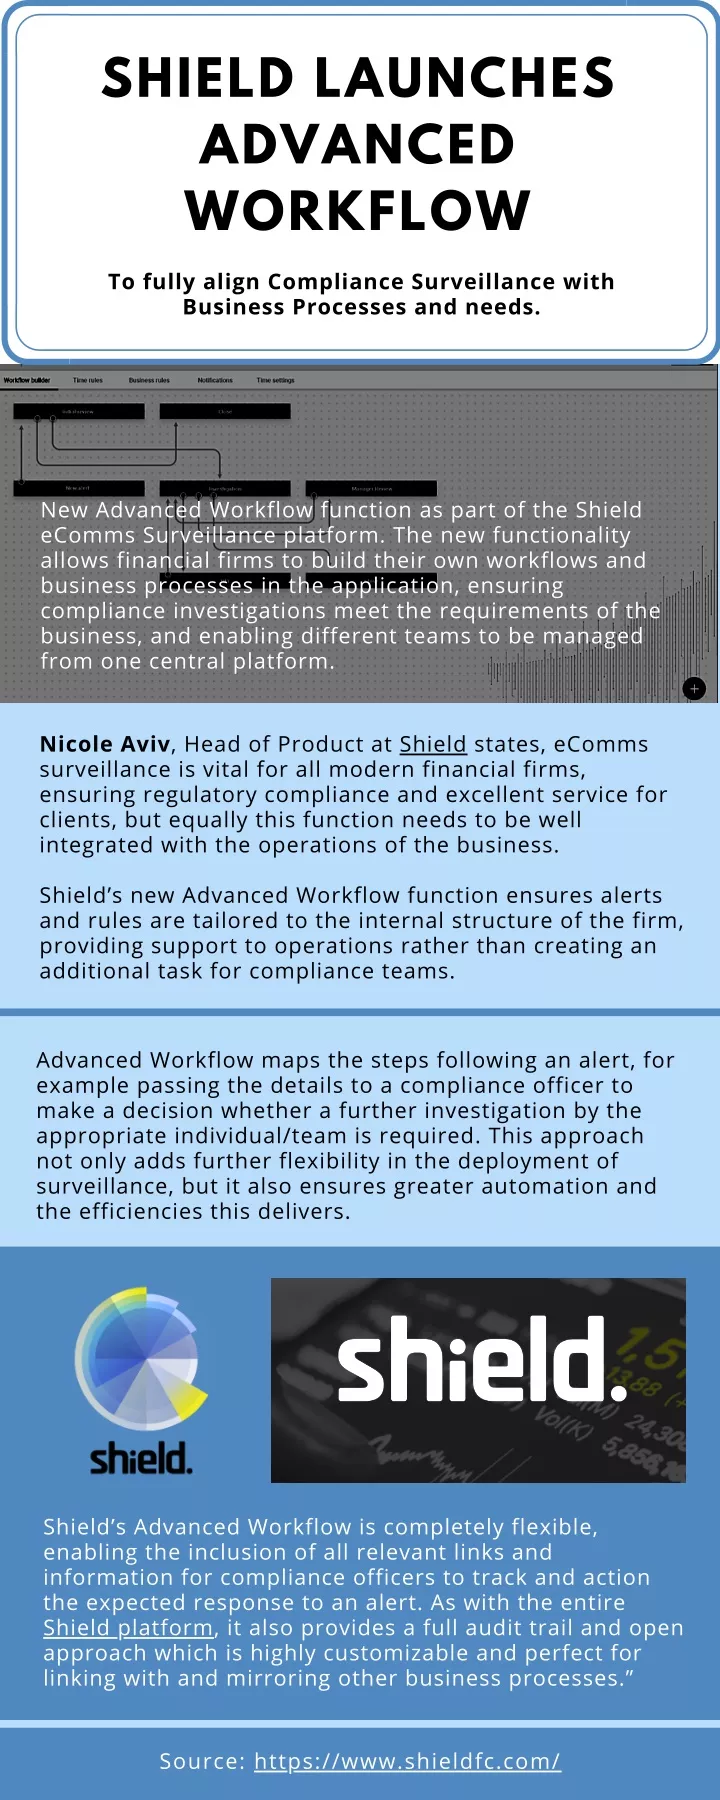 shield launches advanced workflow